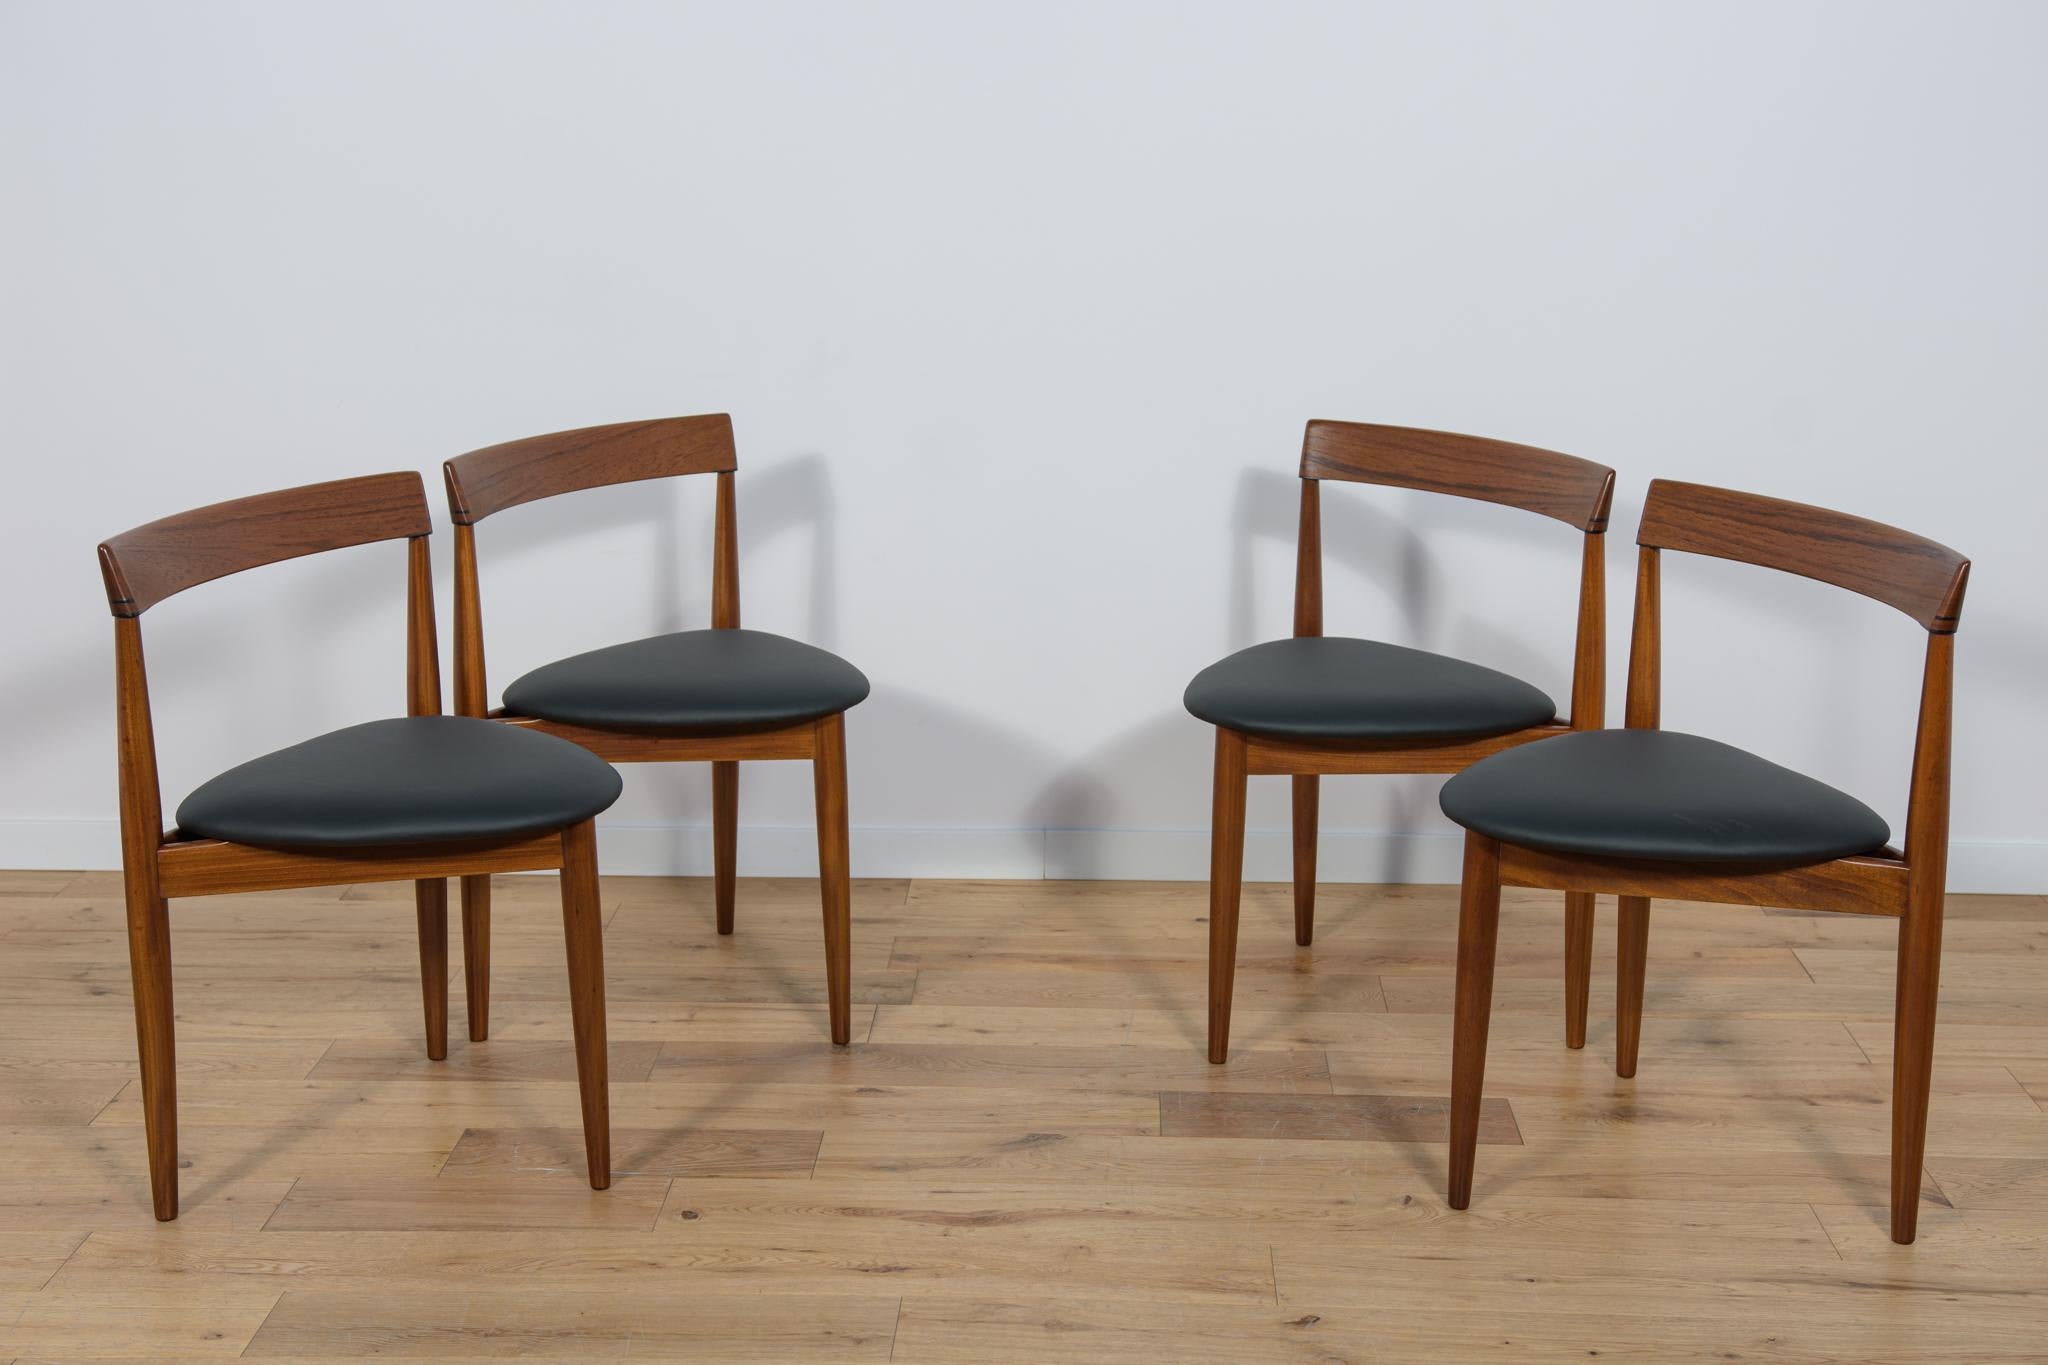 Mid-Century Teak Dining Table and Chairs Set by Hans Olsen for Frem Røjle, 1950s For Sale 5